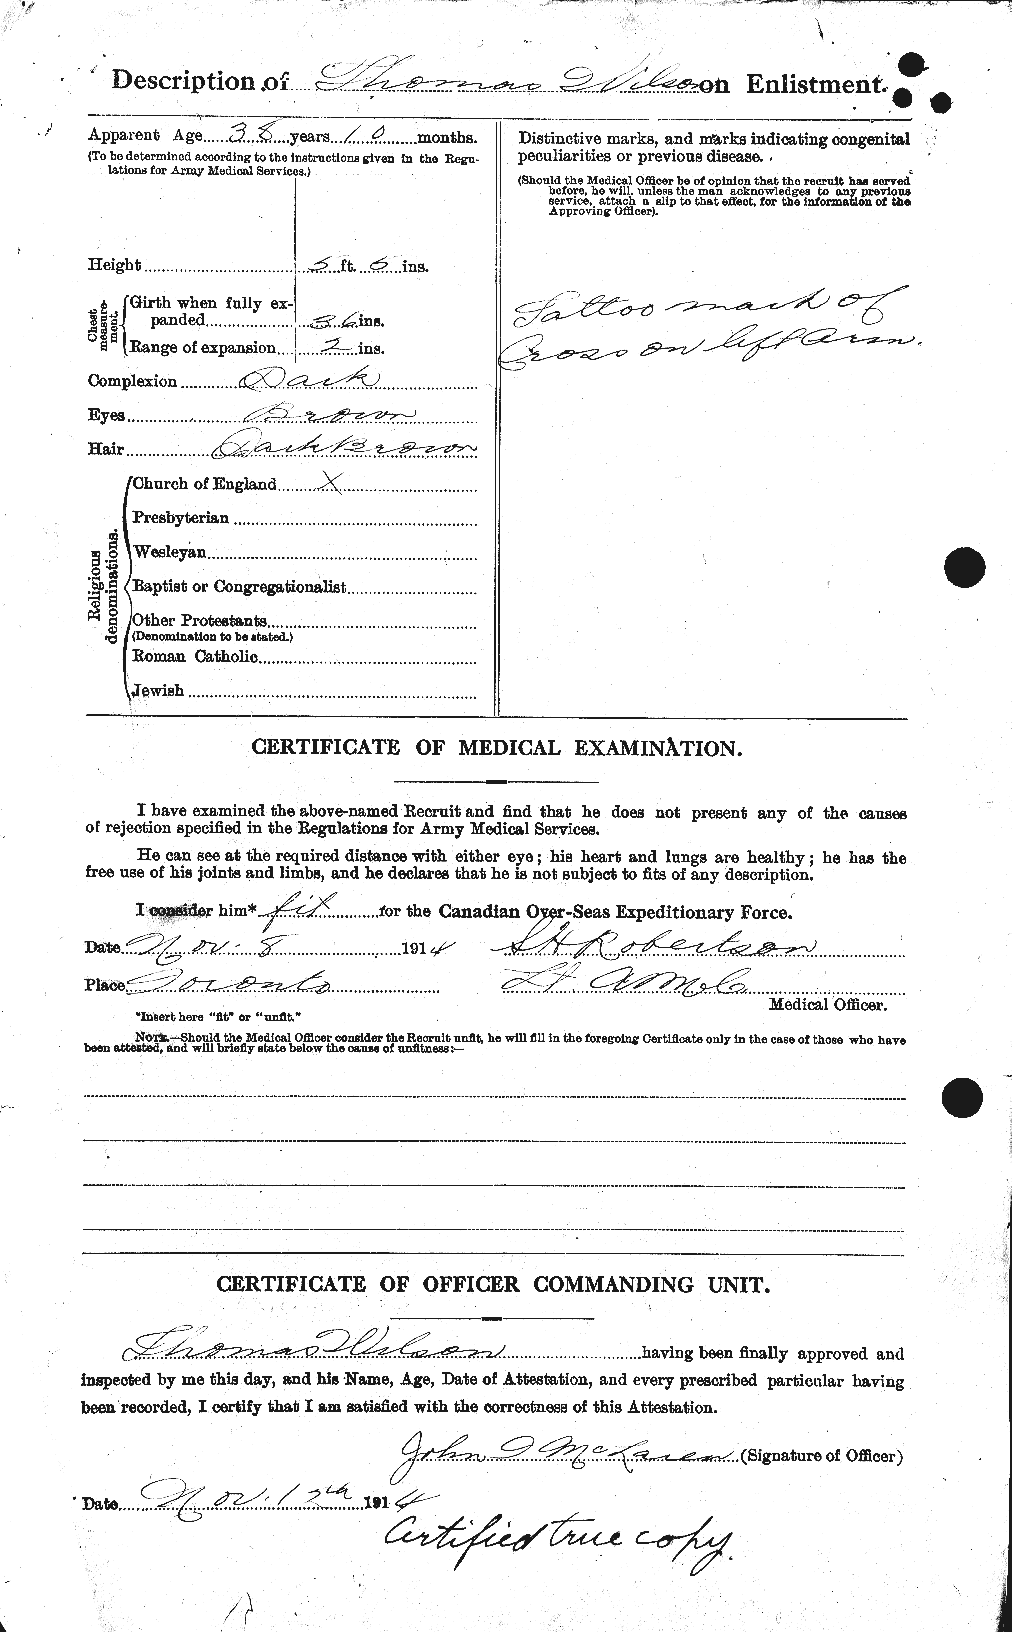 Personnel Records of the First World War - CEF 681189b